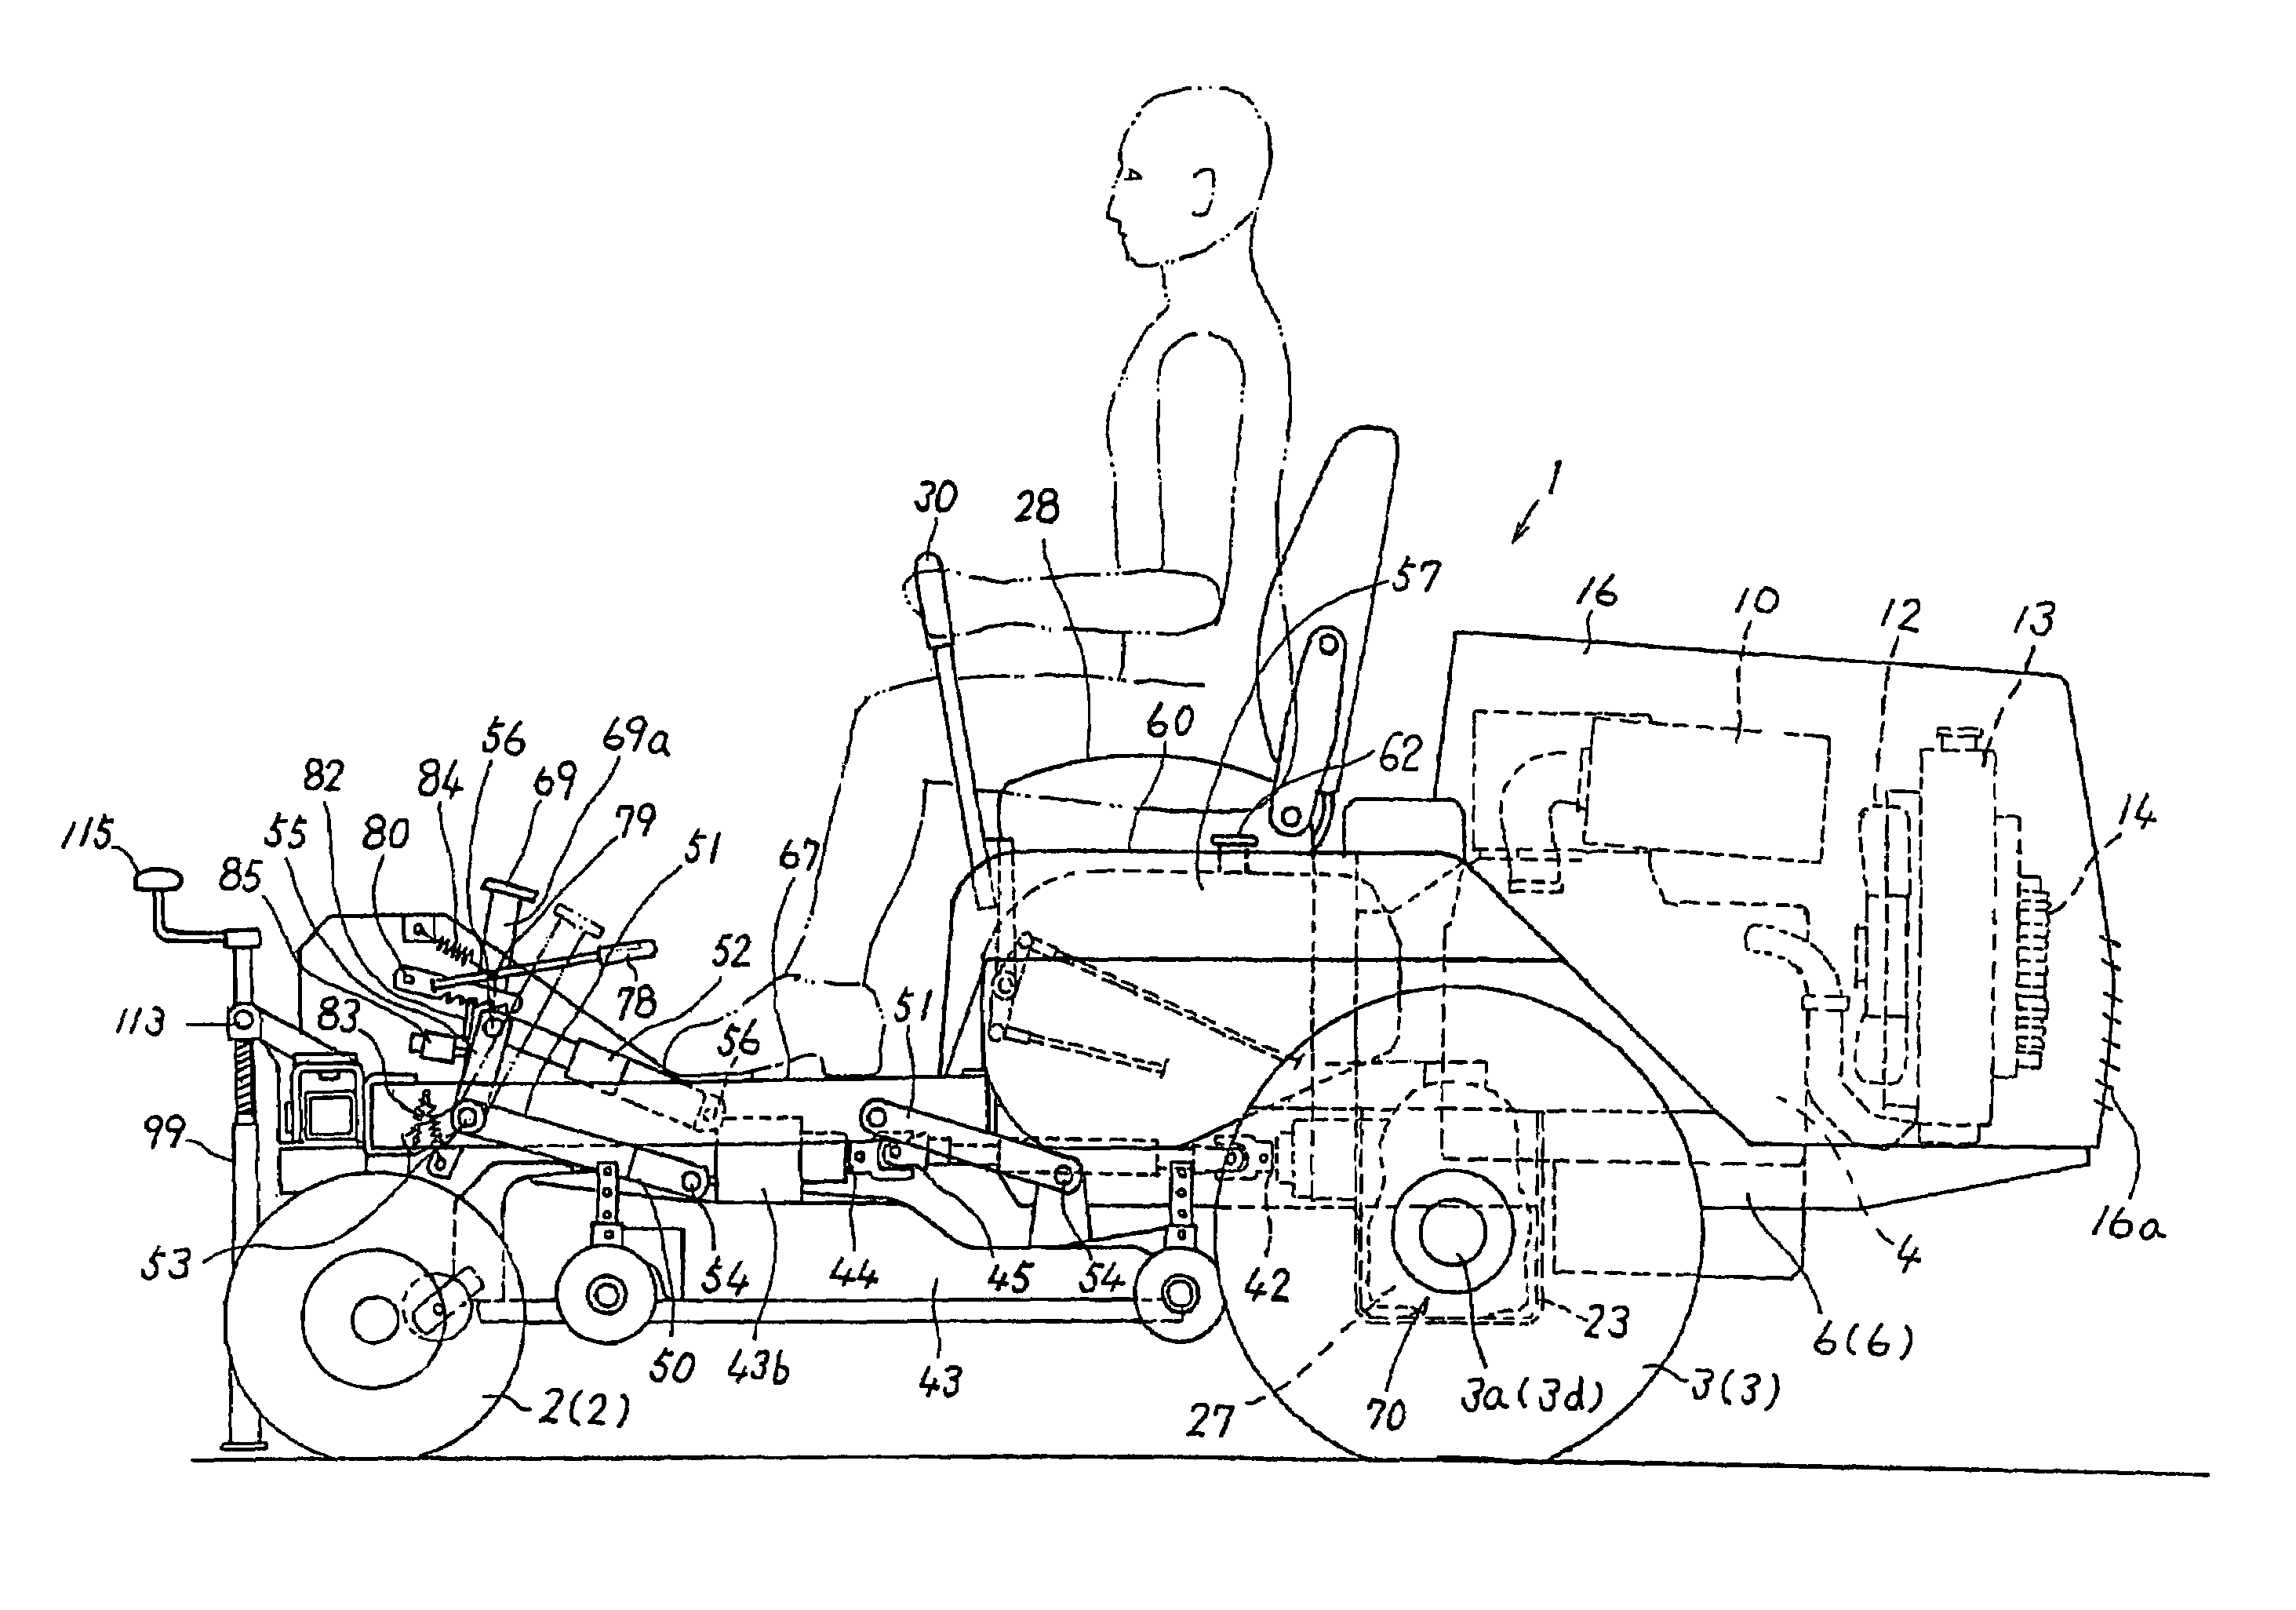 Riding mower provided with hydrostatic transmissions